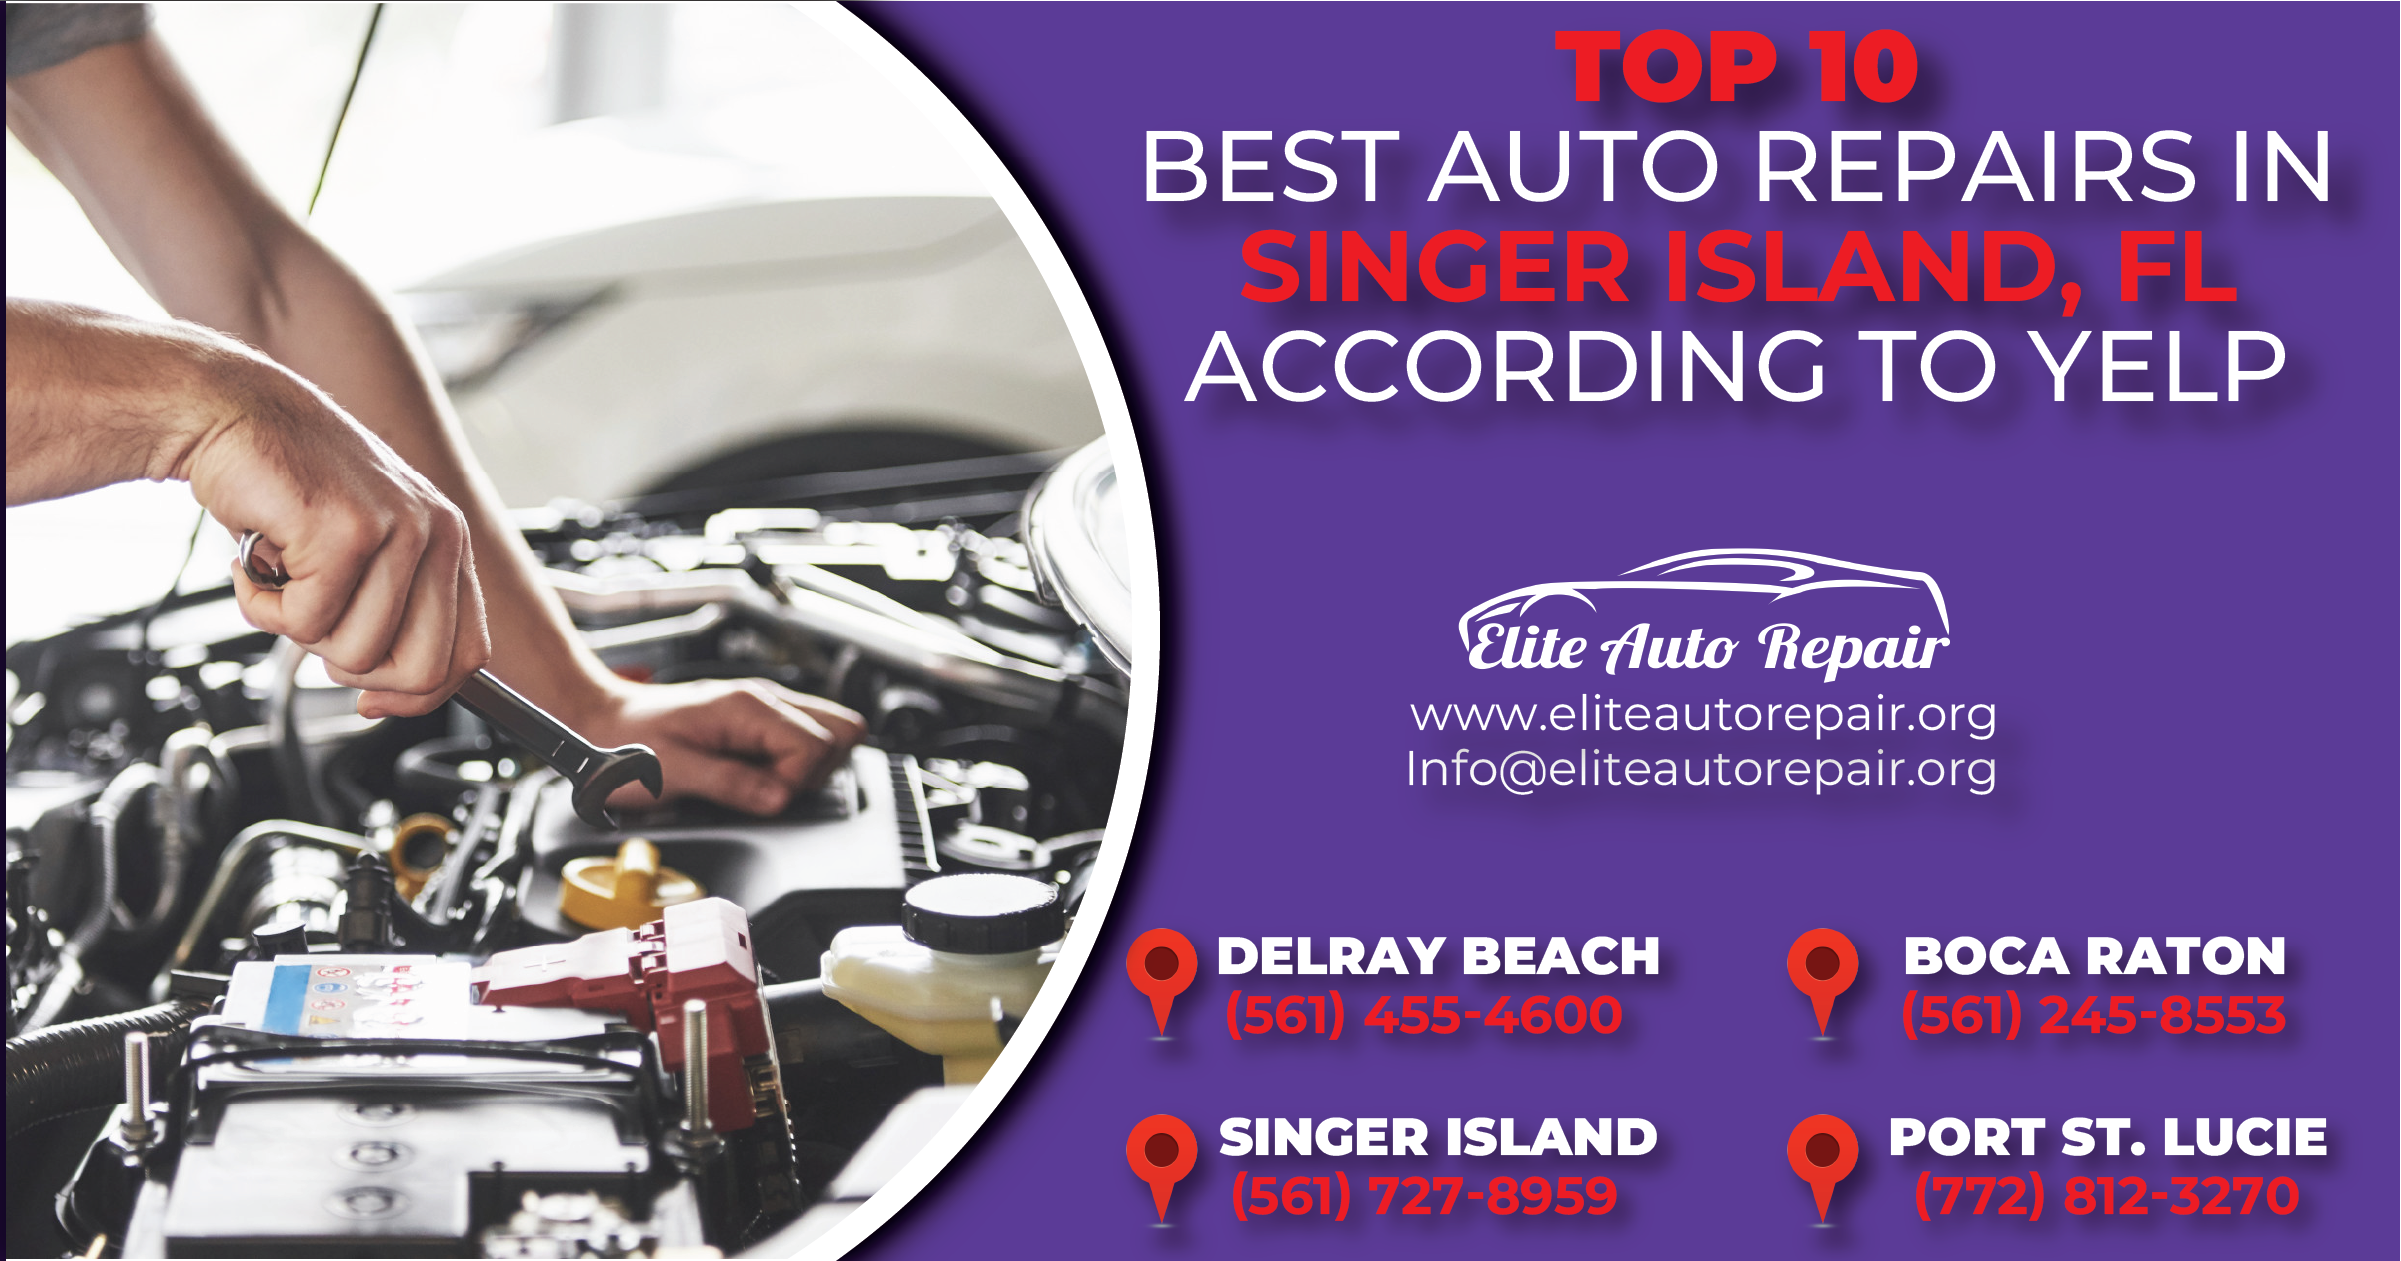 Top 10 Best Auto Repairs in Singer Island, Florida – According to Yelp